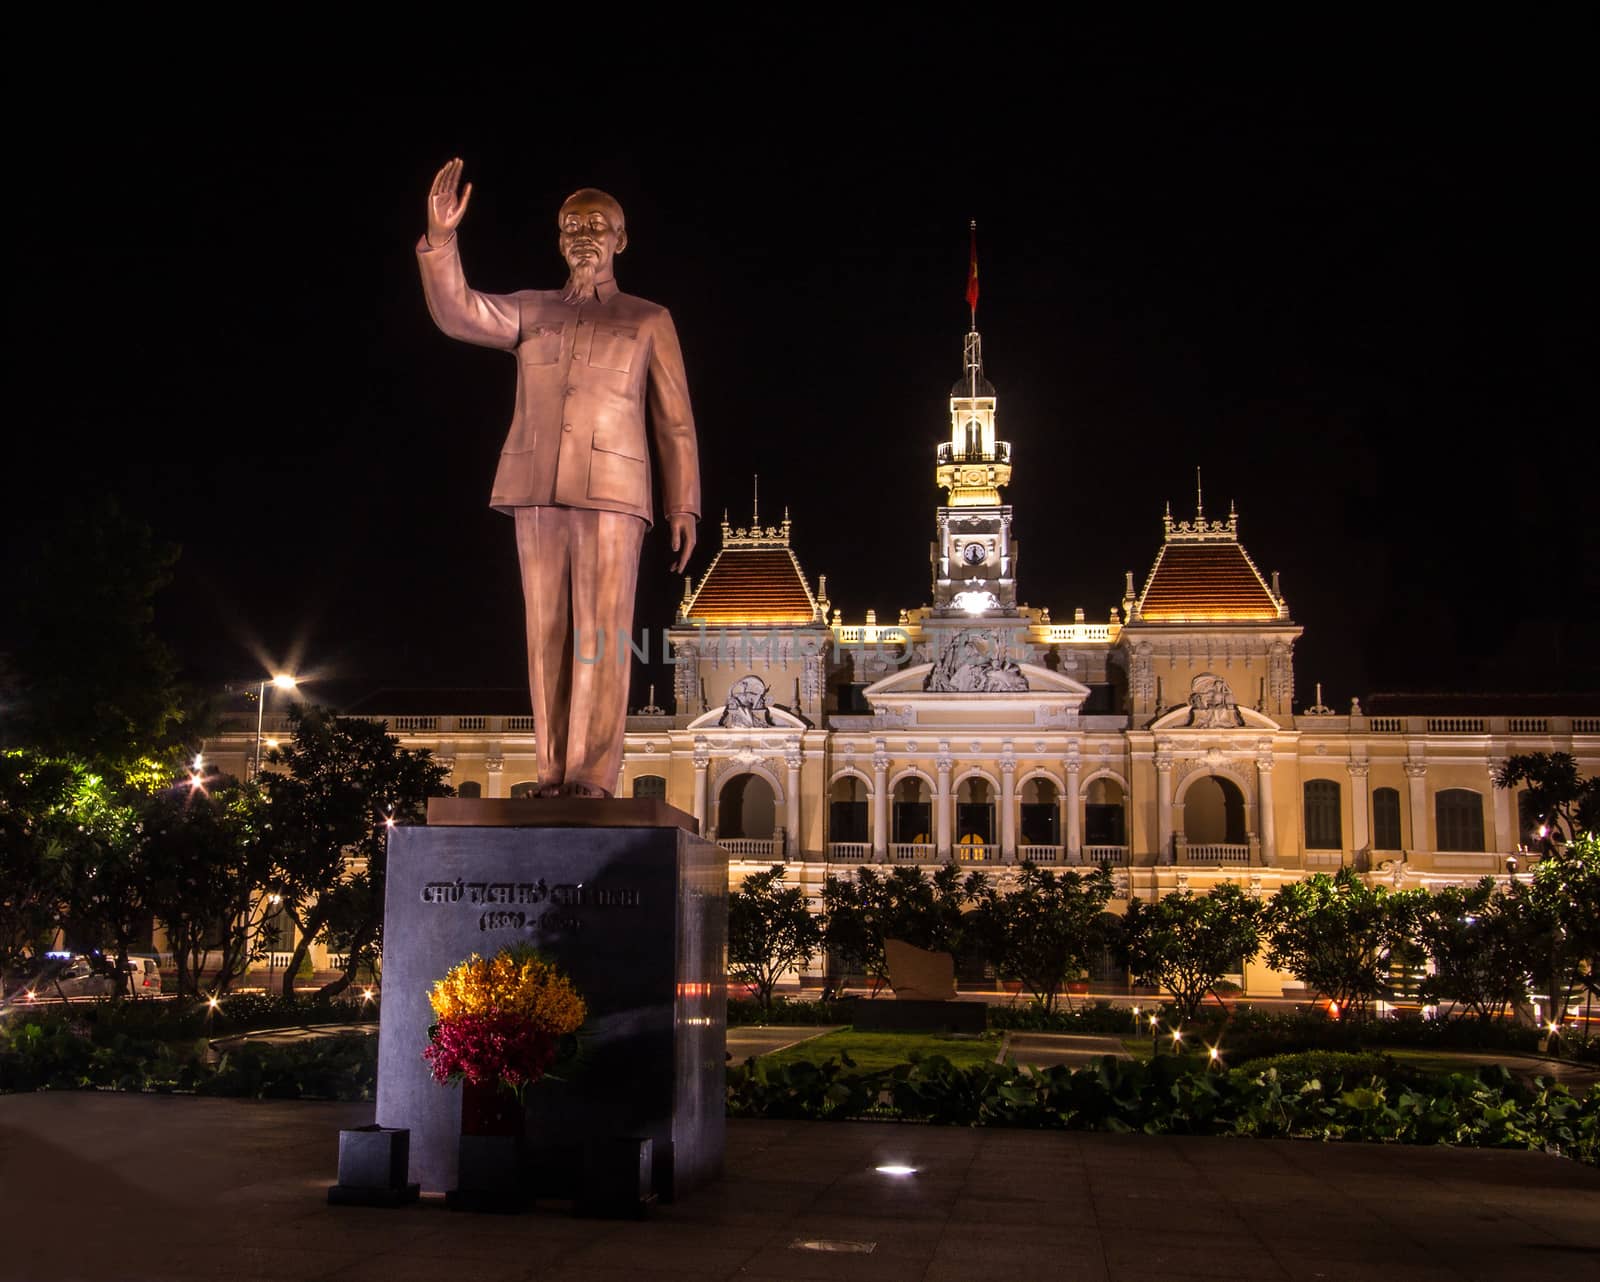 Night View: Ho Chi Minh statue in front of City Hall, Saigon, Ho Chi Minh City, Vietnam by victorflowerfly